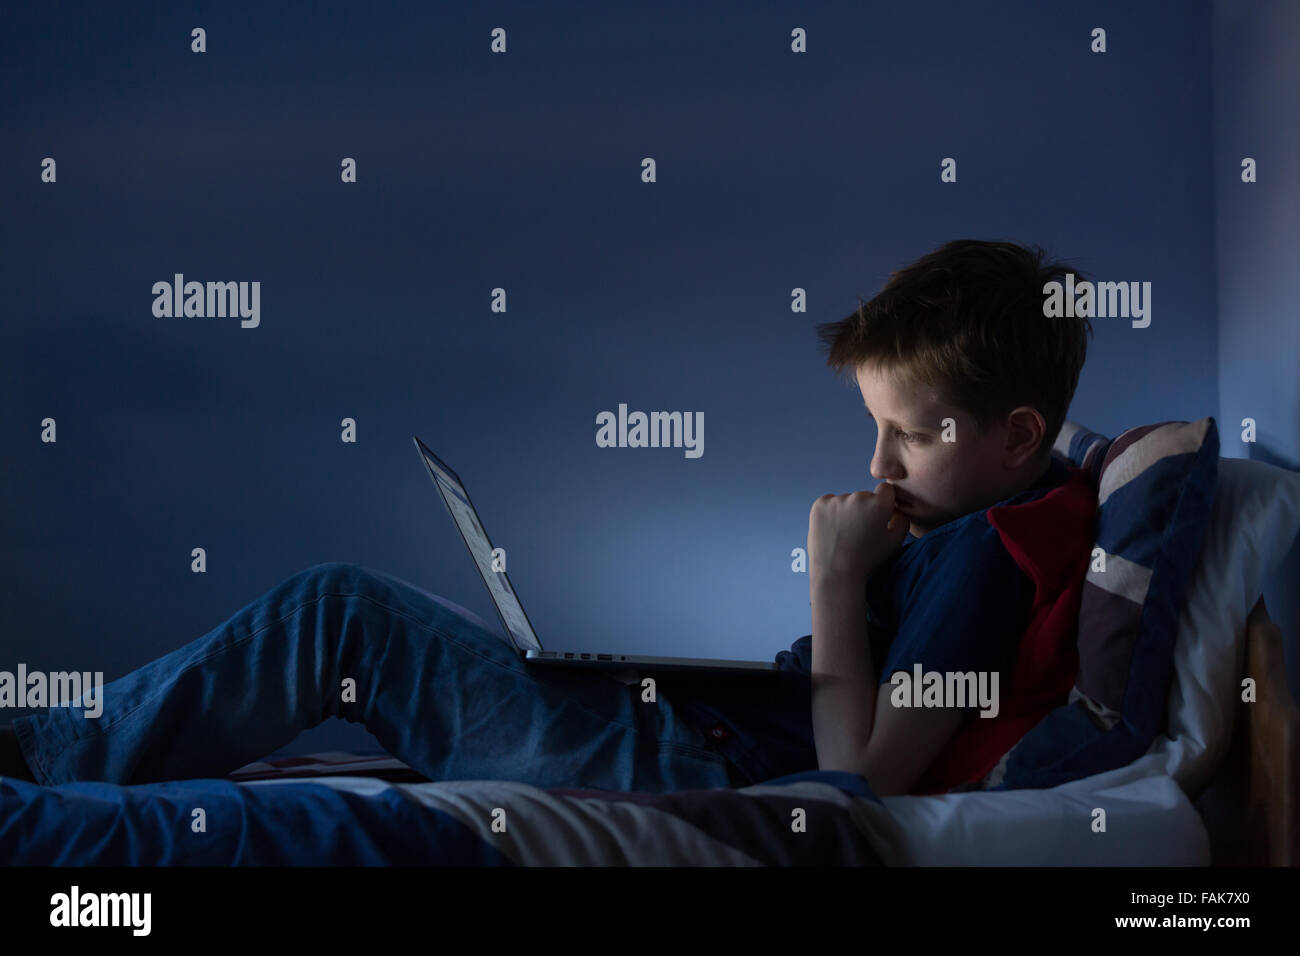 Online bullying Cyber bullying photo of an upset boy in his bedroom looking at hurtful messages on social media Stock Photo